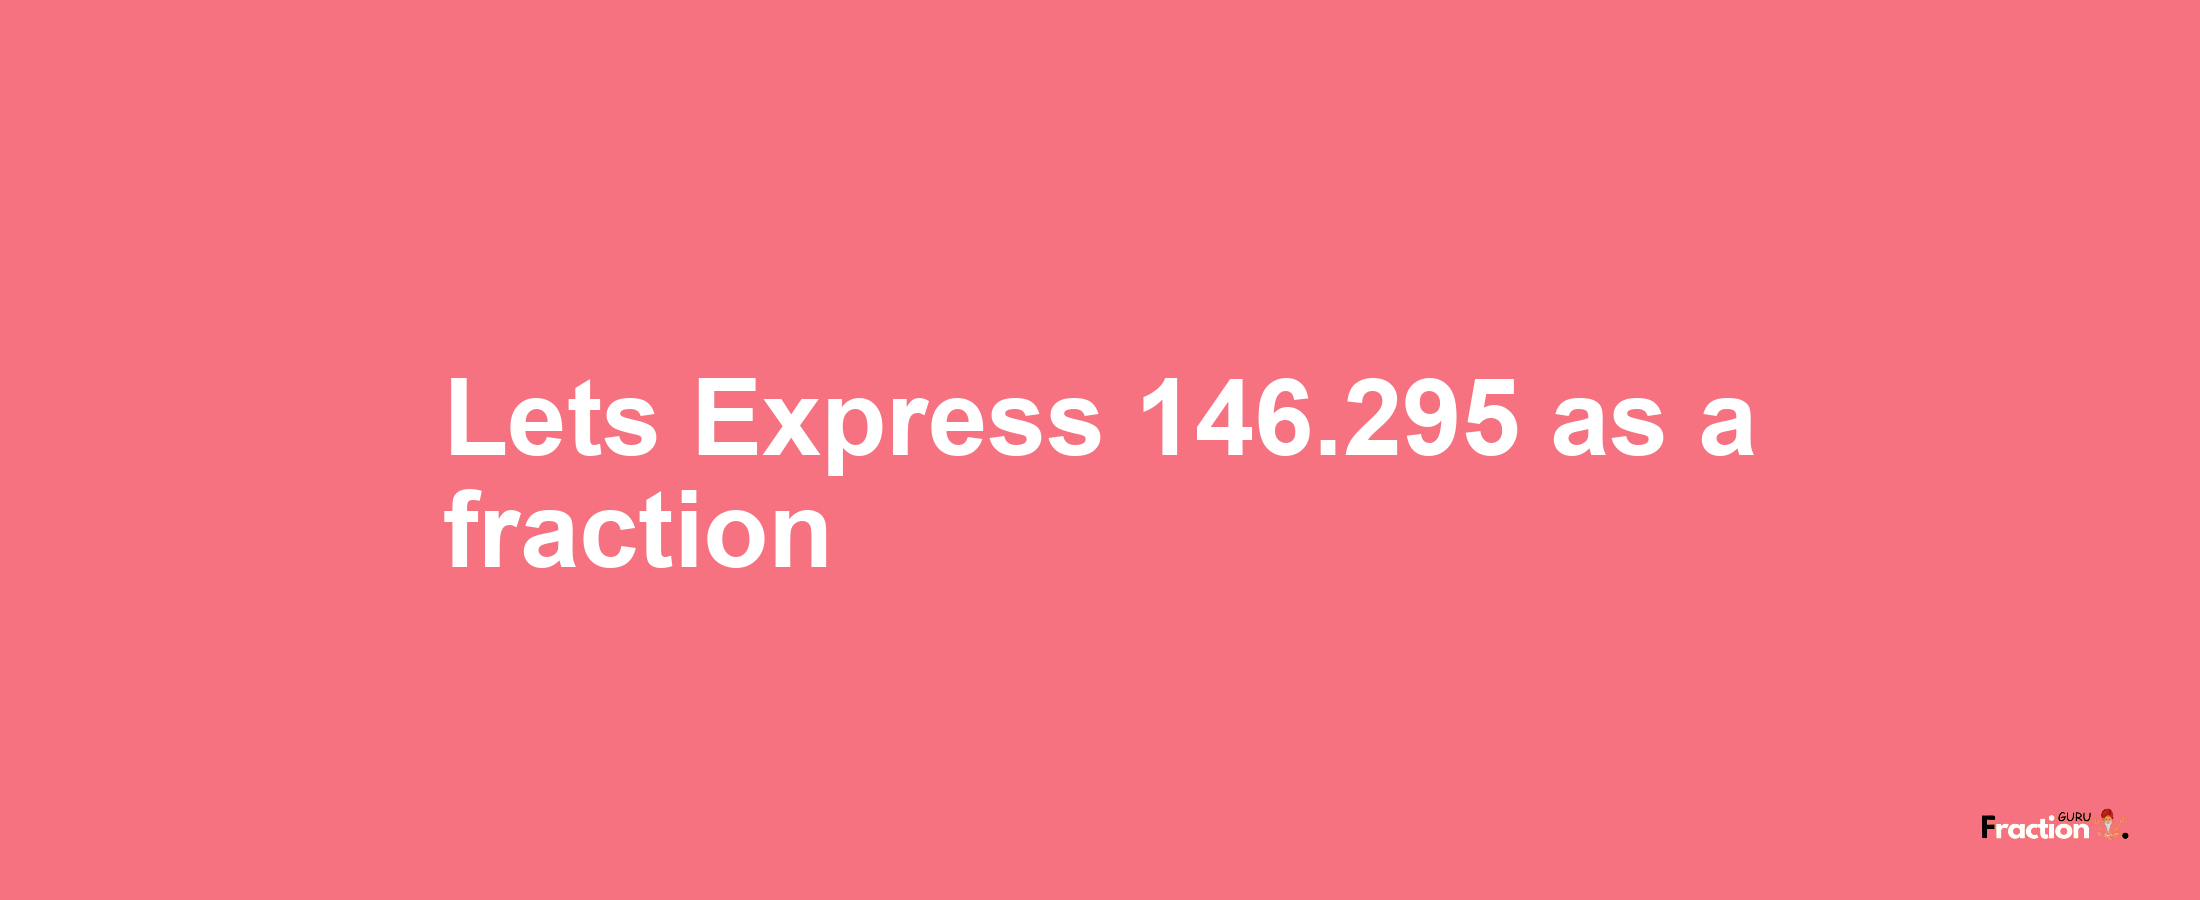 Lets Express 146.295 as afraction